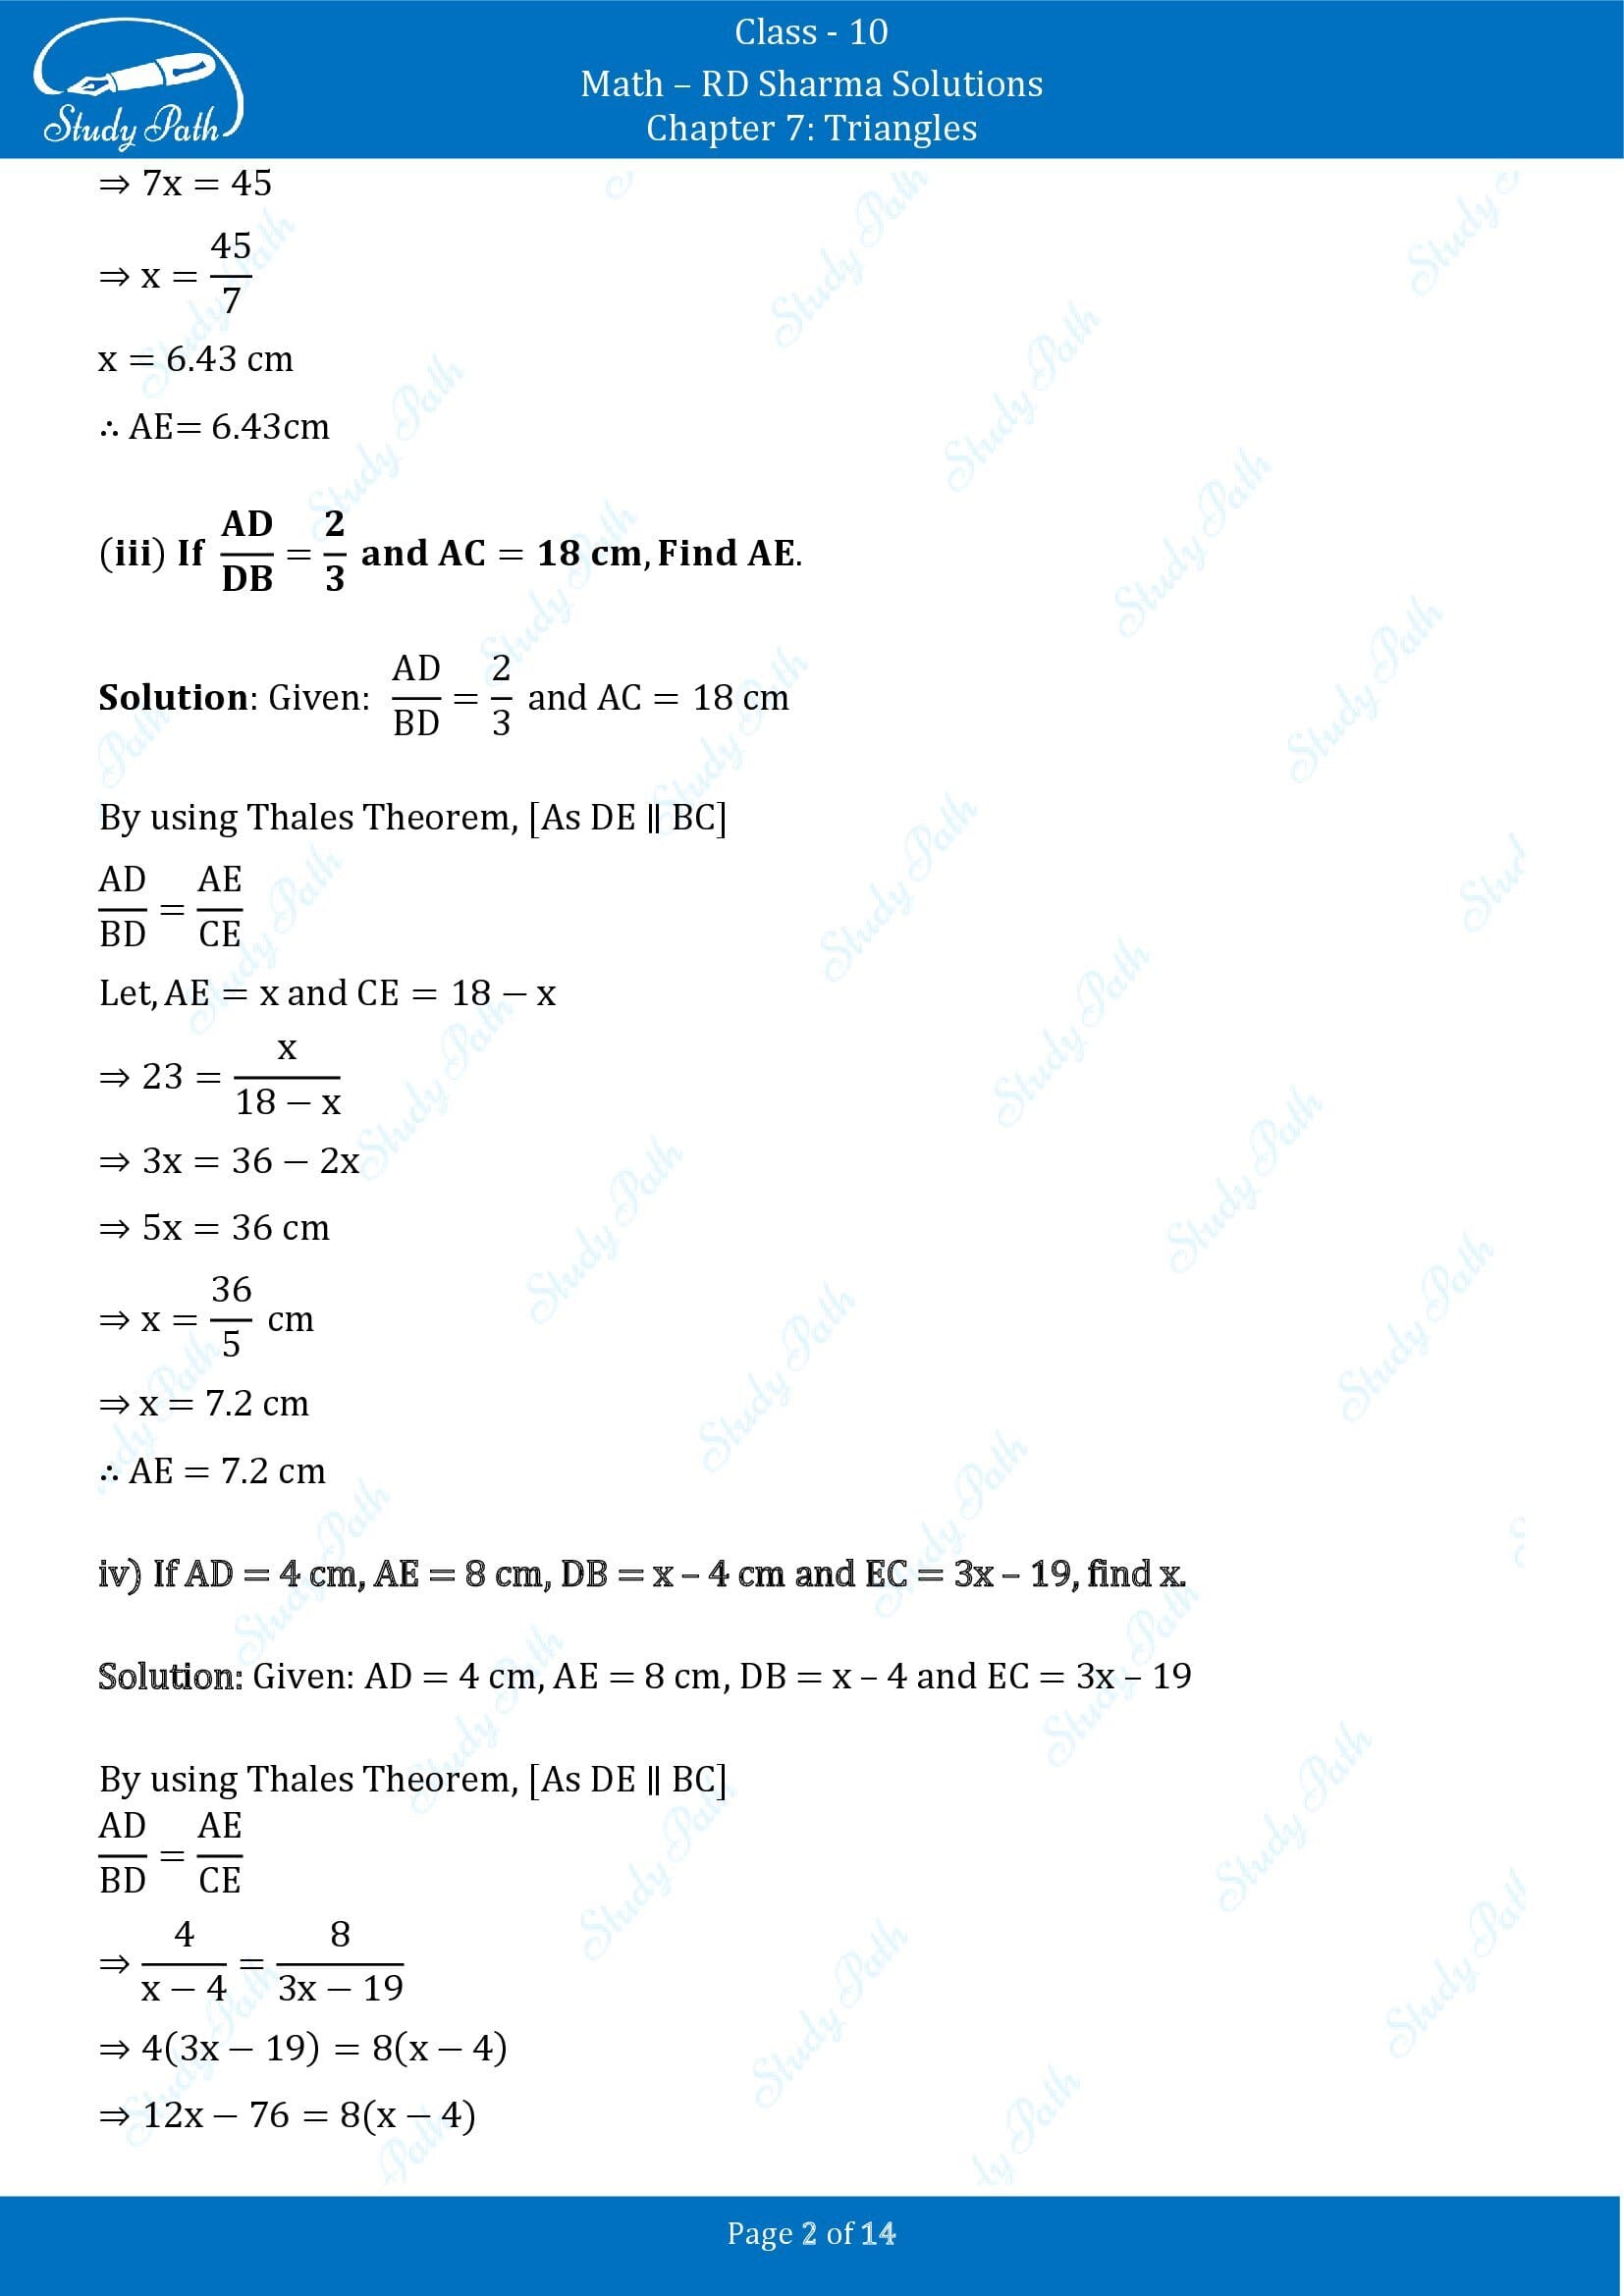 RD Sharma Solutions Class 10 Chapter 7 Triangles Exercise 7.2 00002